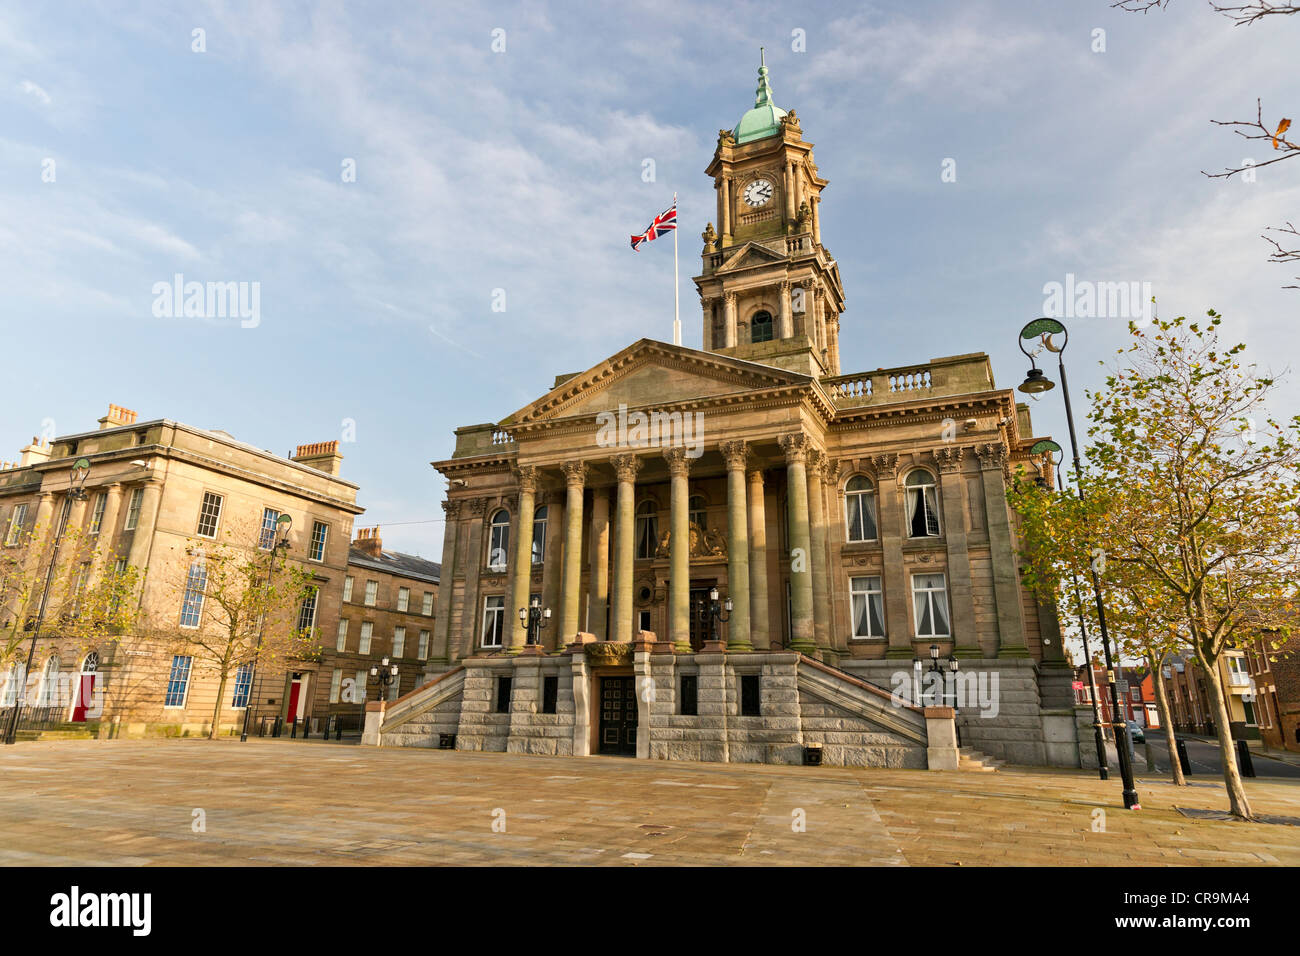 Hamilton Square in Birkenhead, Wirral, England is a town square surrounded by Georgian terraces. Stock Photo